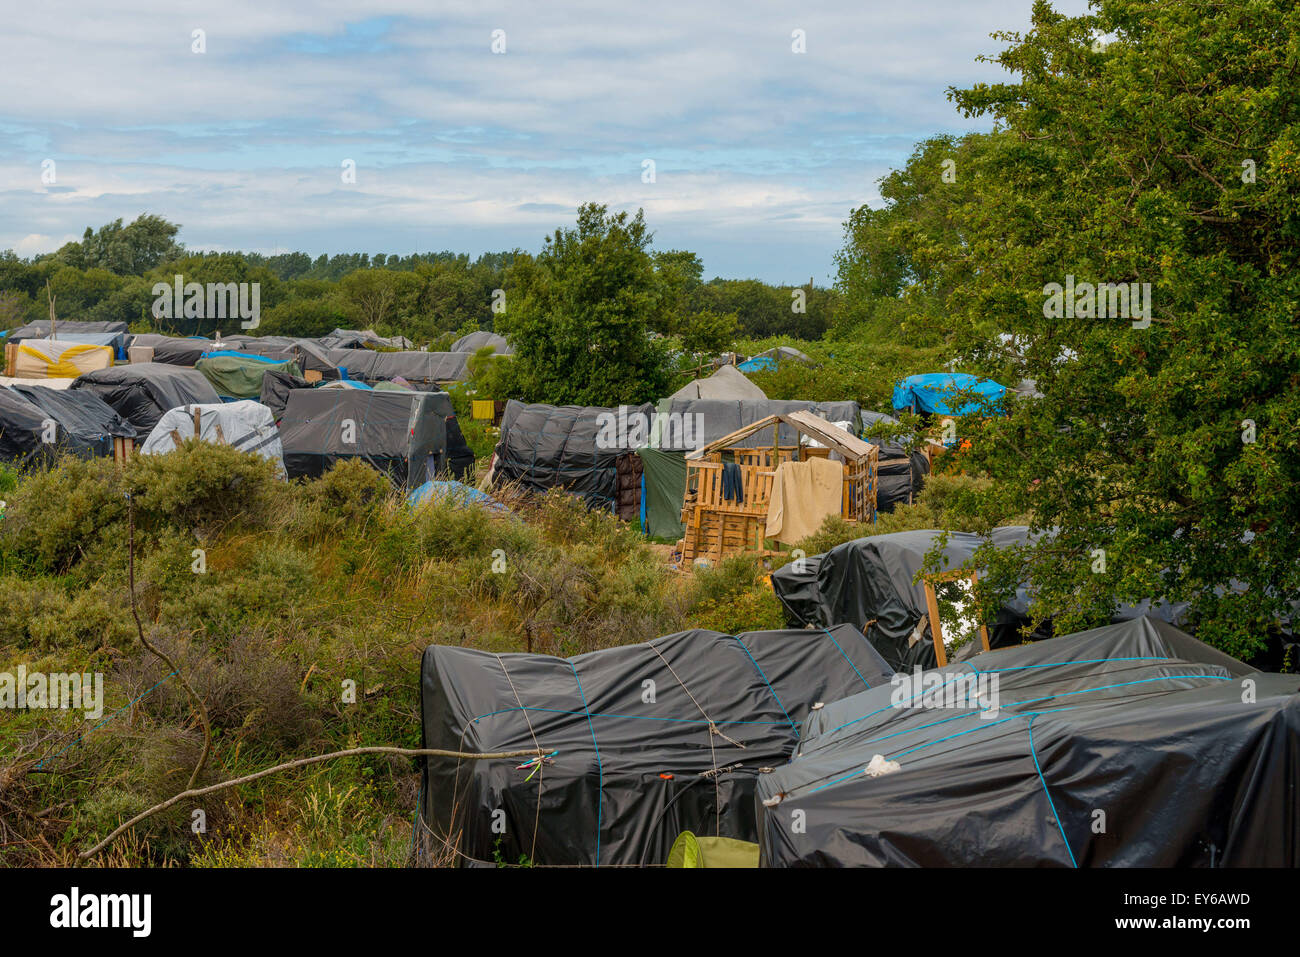 Calais, France. 22nd July, 2015. Refugees from Afghanistan, Syria, Sudan, and Eritrea steadily descend on a migrant camp in the French coastal town of Calais. They hope to gain entry to the UK, just 21 miles away across the English Channel. But in May, French police destroyed their camp and told the migrants to go elsewhere. And so they moved. across the street. (Credit Image: © Velar Grant via ZUMA Wire) Credit:  ZUMA Press, Inc./Alamy Live News Stock Photo